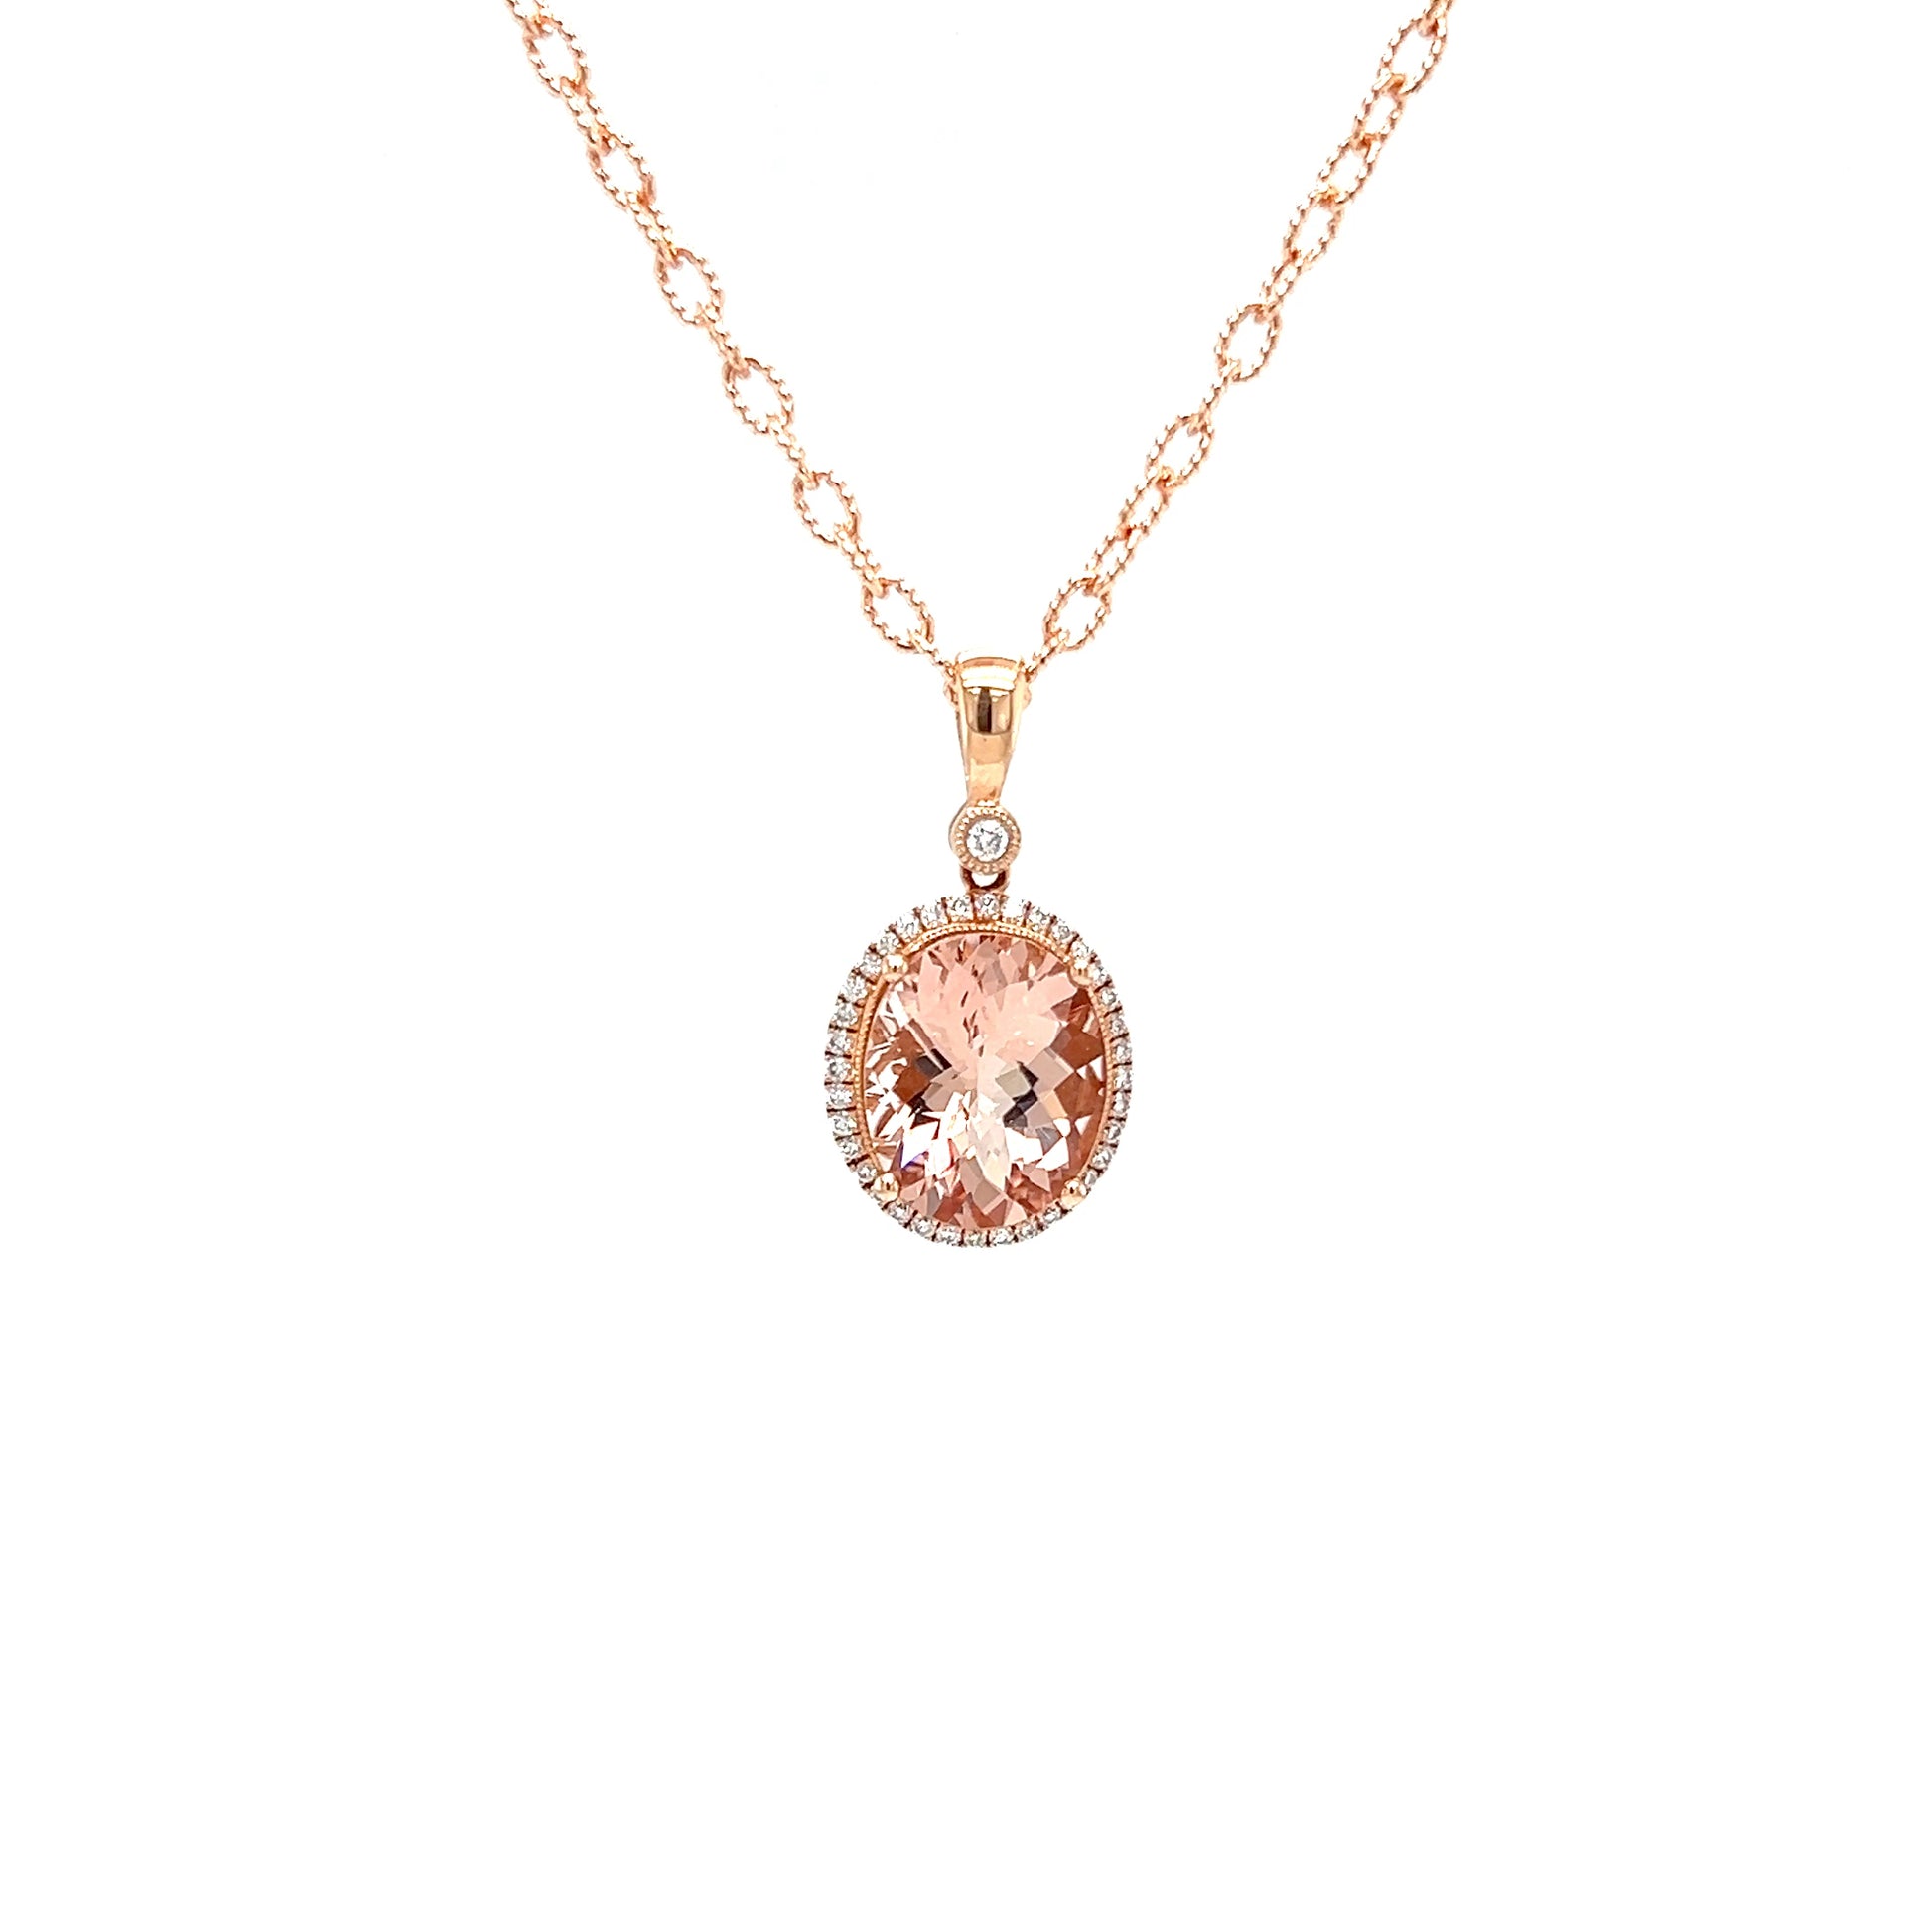 Oval Morganite Necklace with Diamond Halo in 14K Rose Gold. Pendant Front View